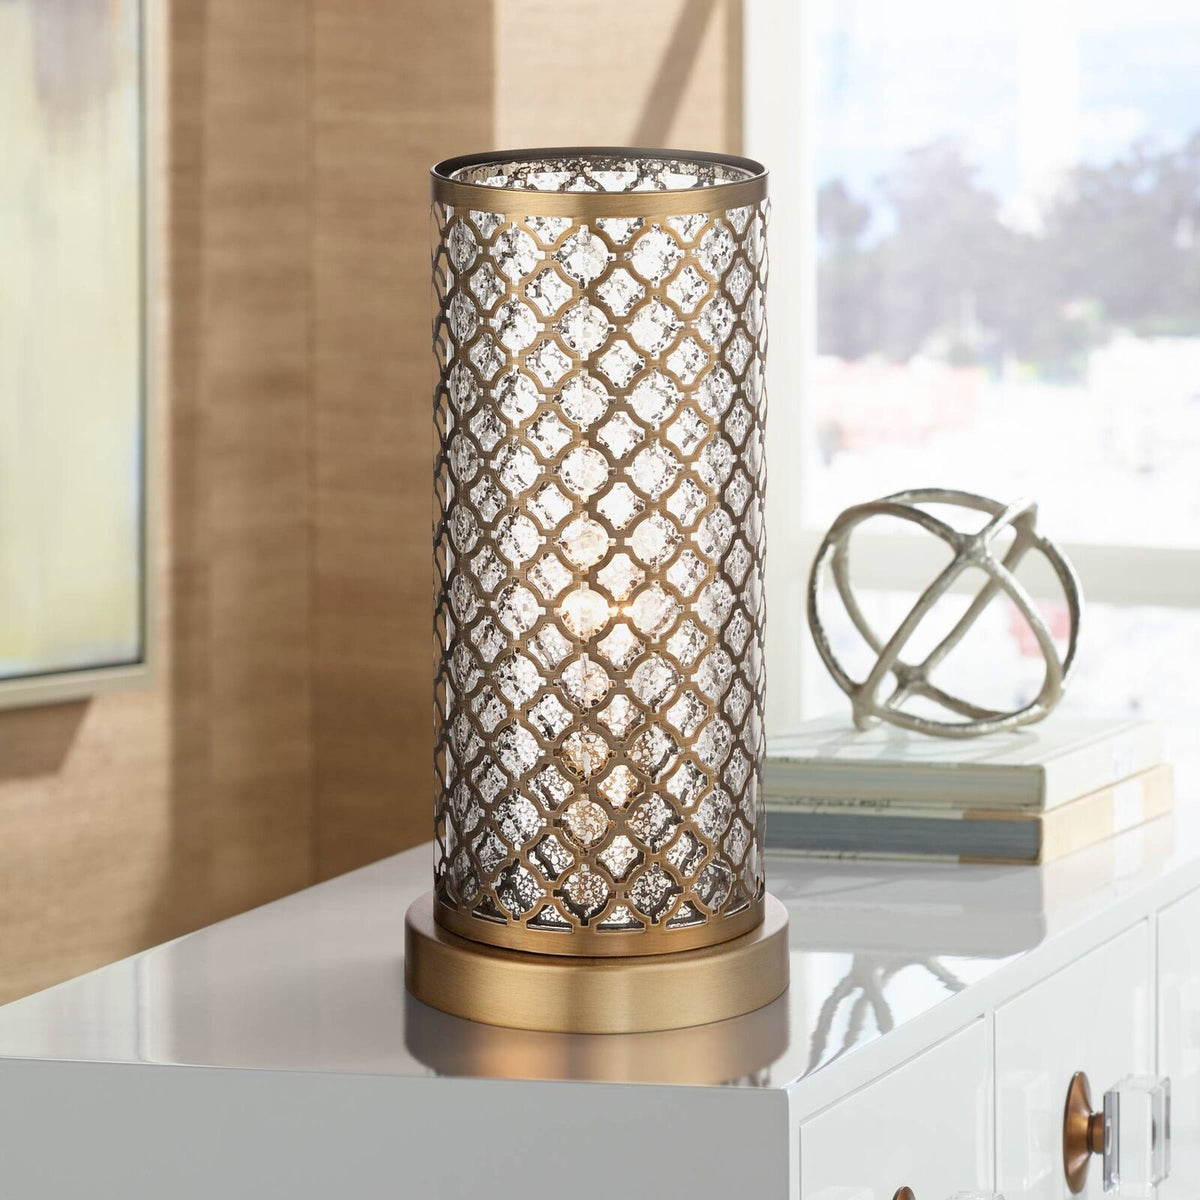 12" High Brass and Mercury Glass Accent Light Lamp for Bedroom Office